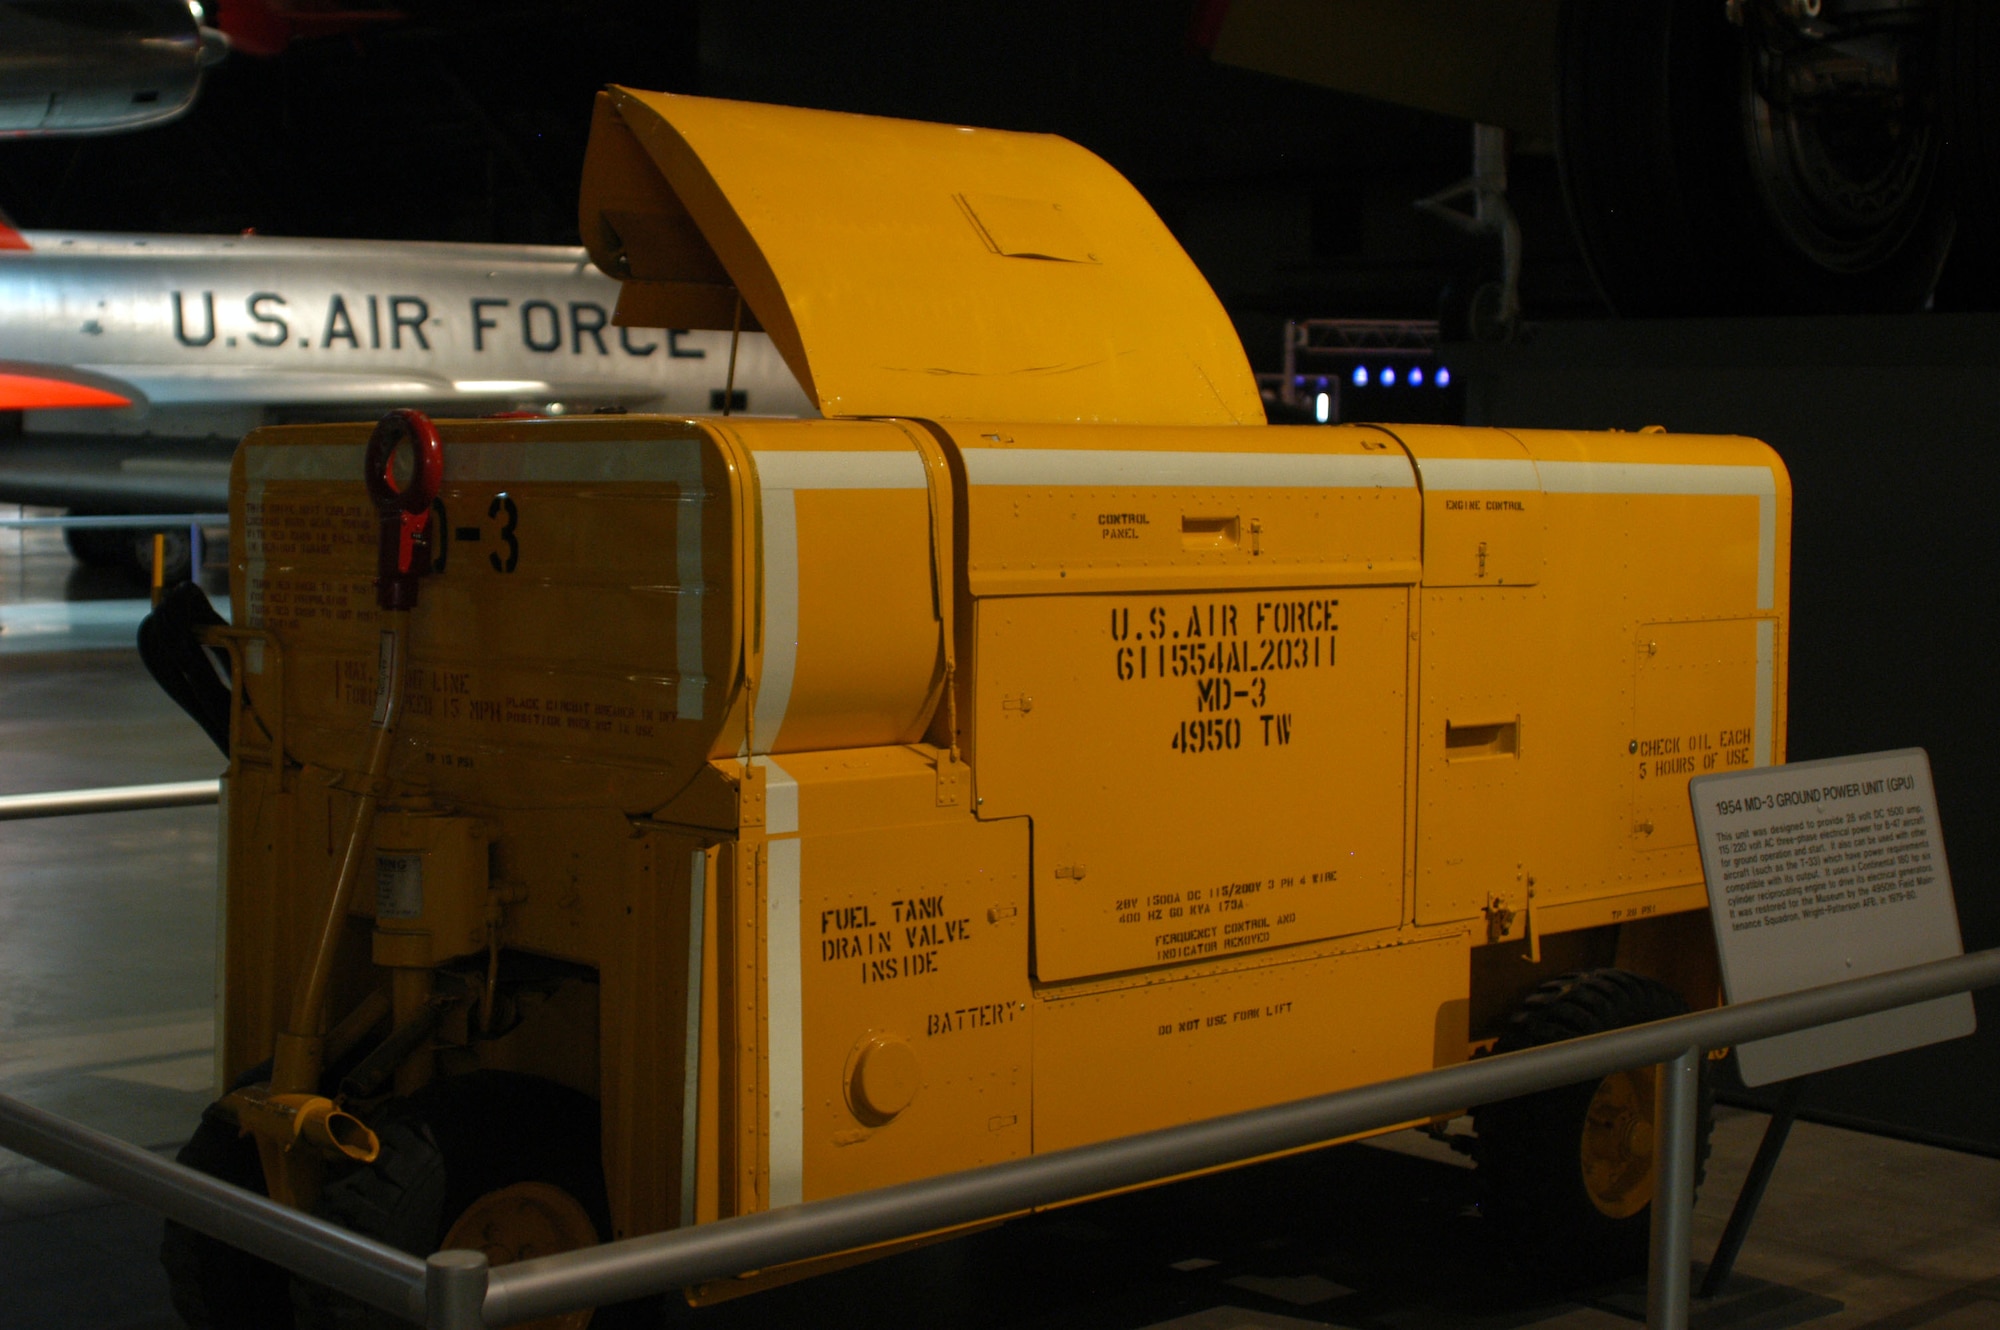 DAYTON, Ohio - MD-3 Ground Power Unit in the Cold War Gallery at the National Museum of the U.S. Air Force. (U.S. Air Force photo)